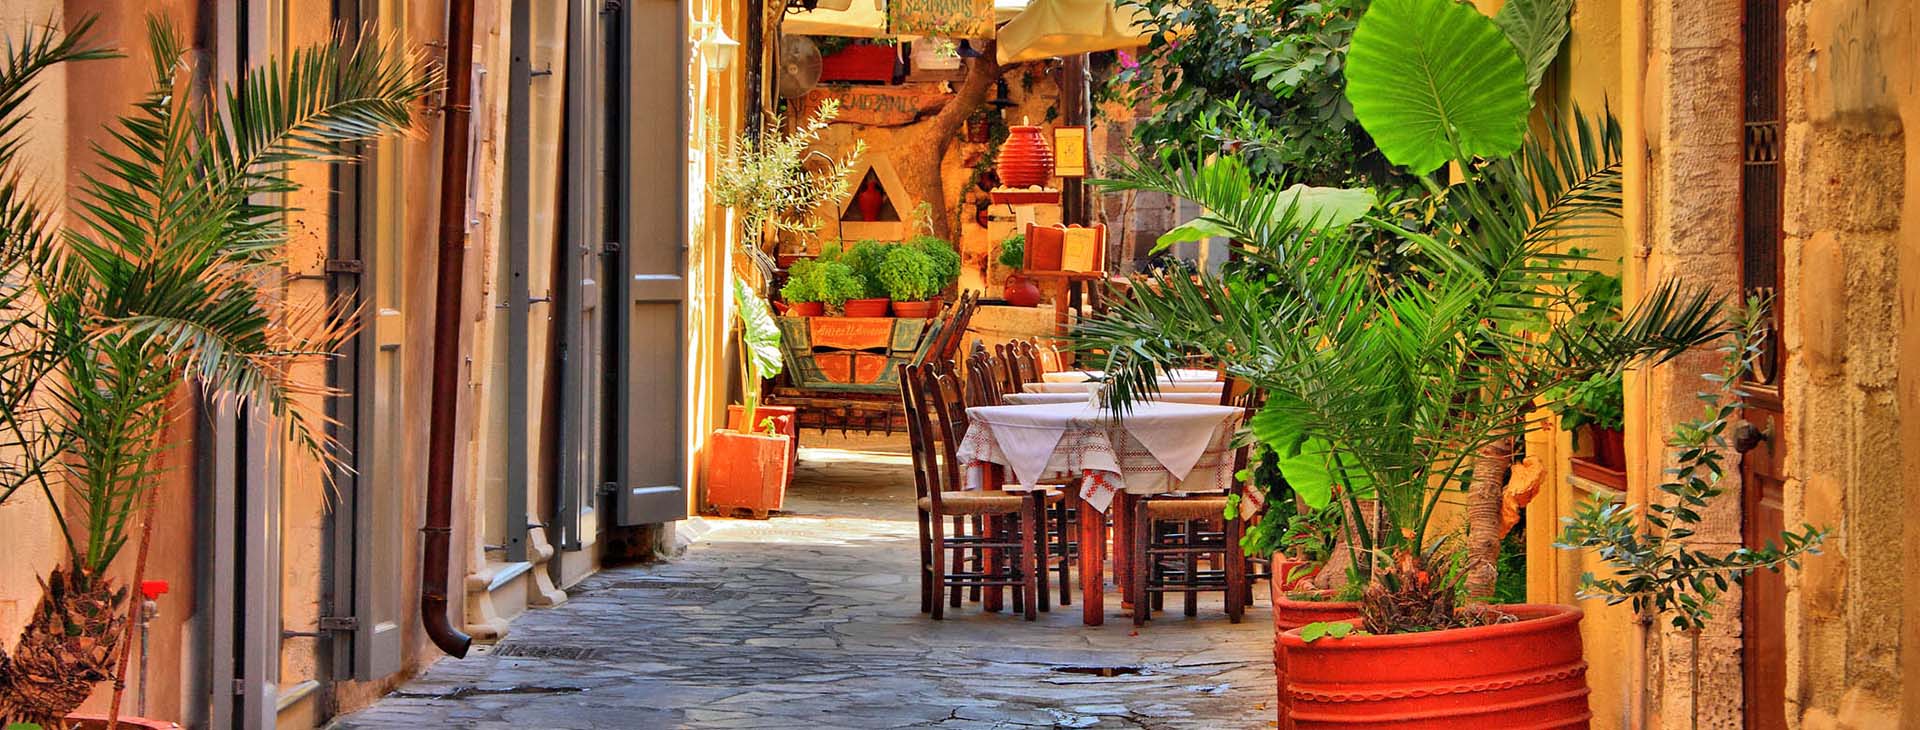 Old town of Chania